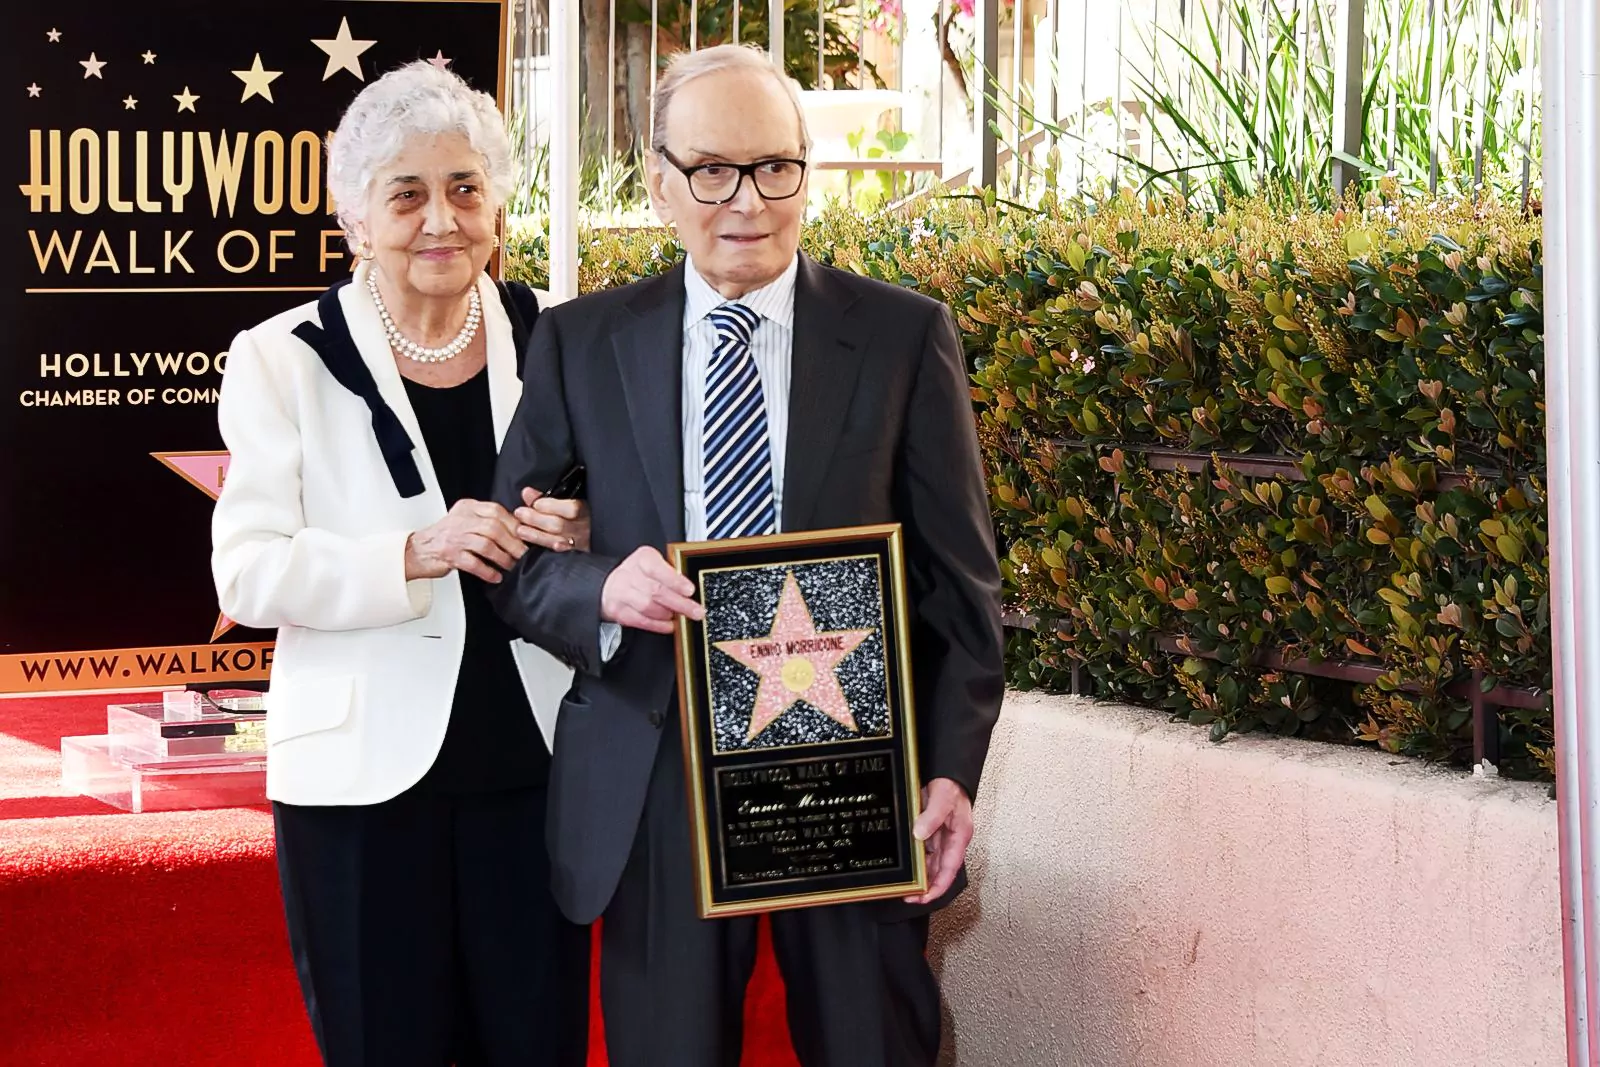 Ennio Morricone and his wife Maria Travia receive a star on the Hollywood Walk of Fame in Los Angeles, February 26, 2016.